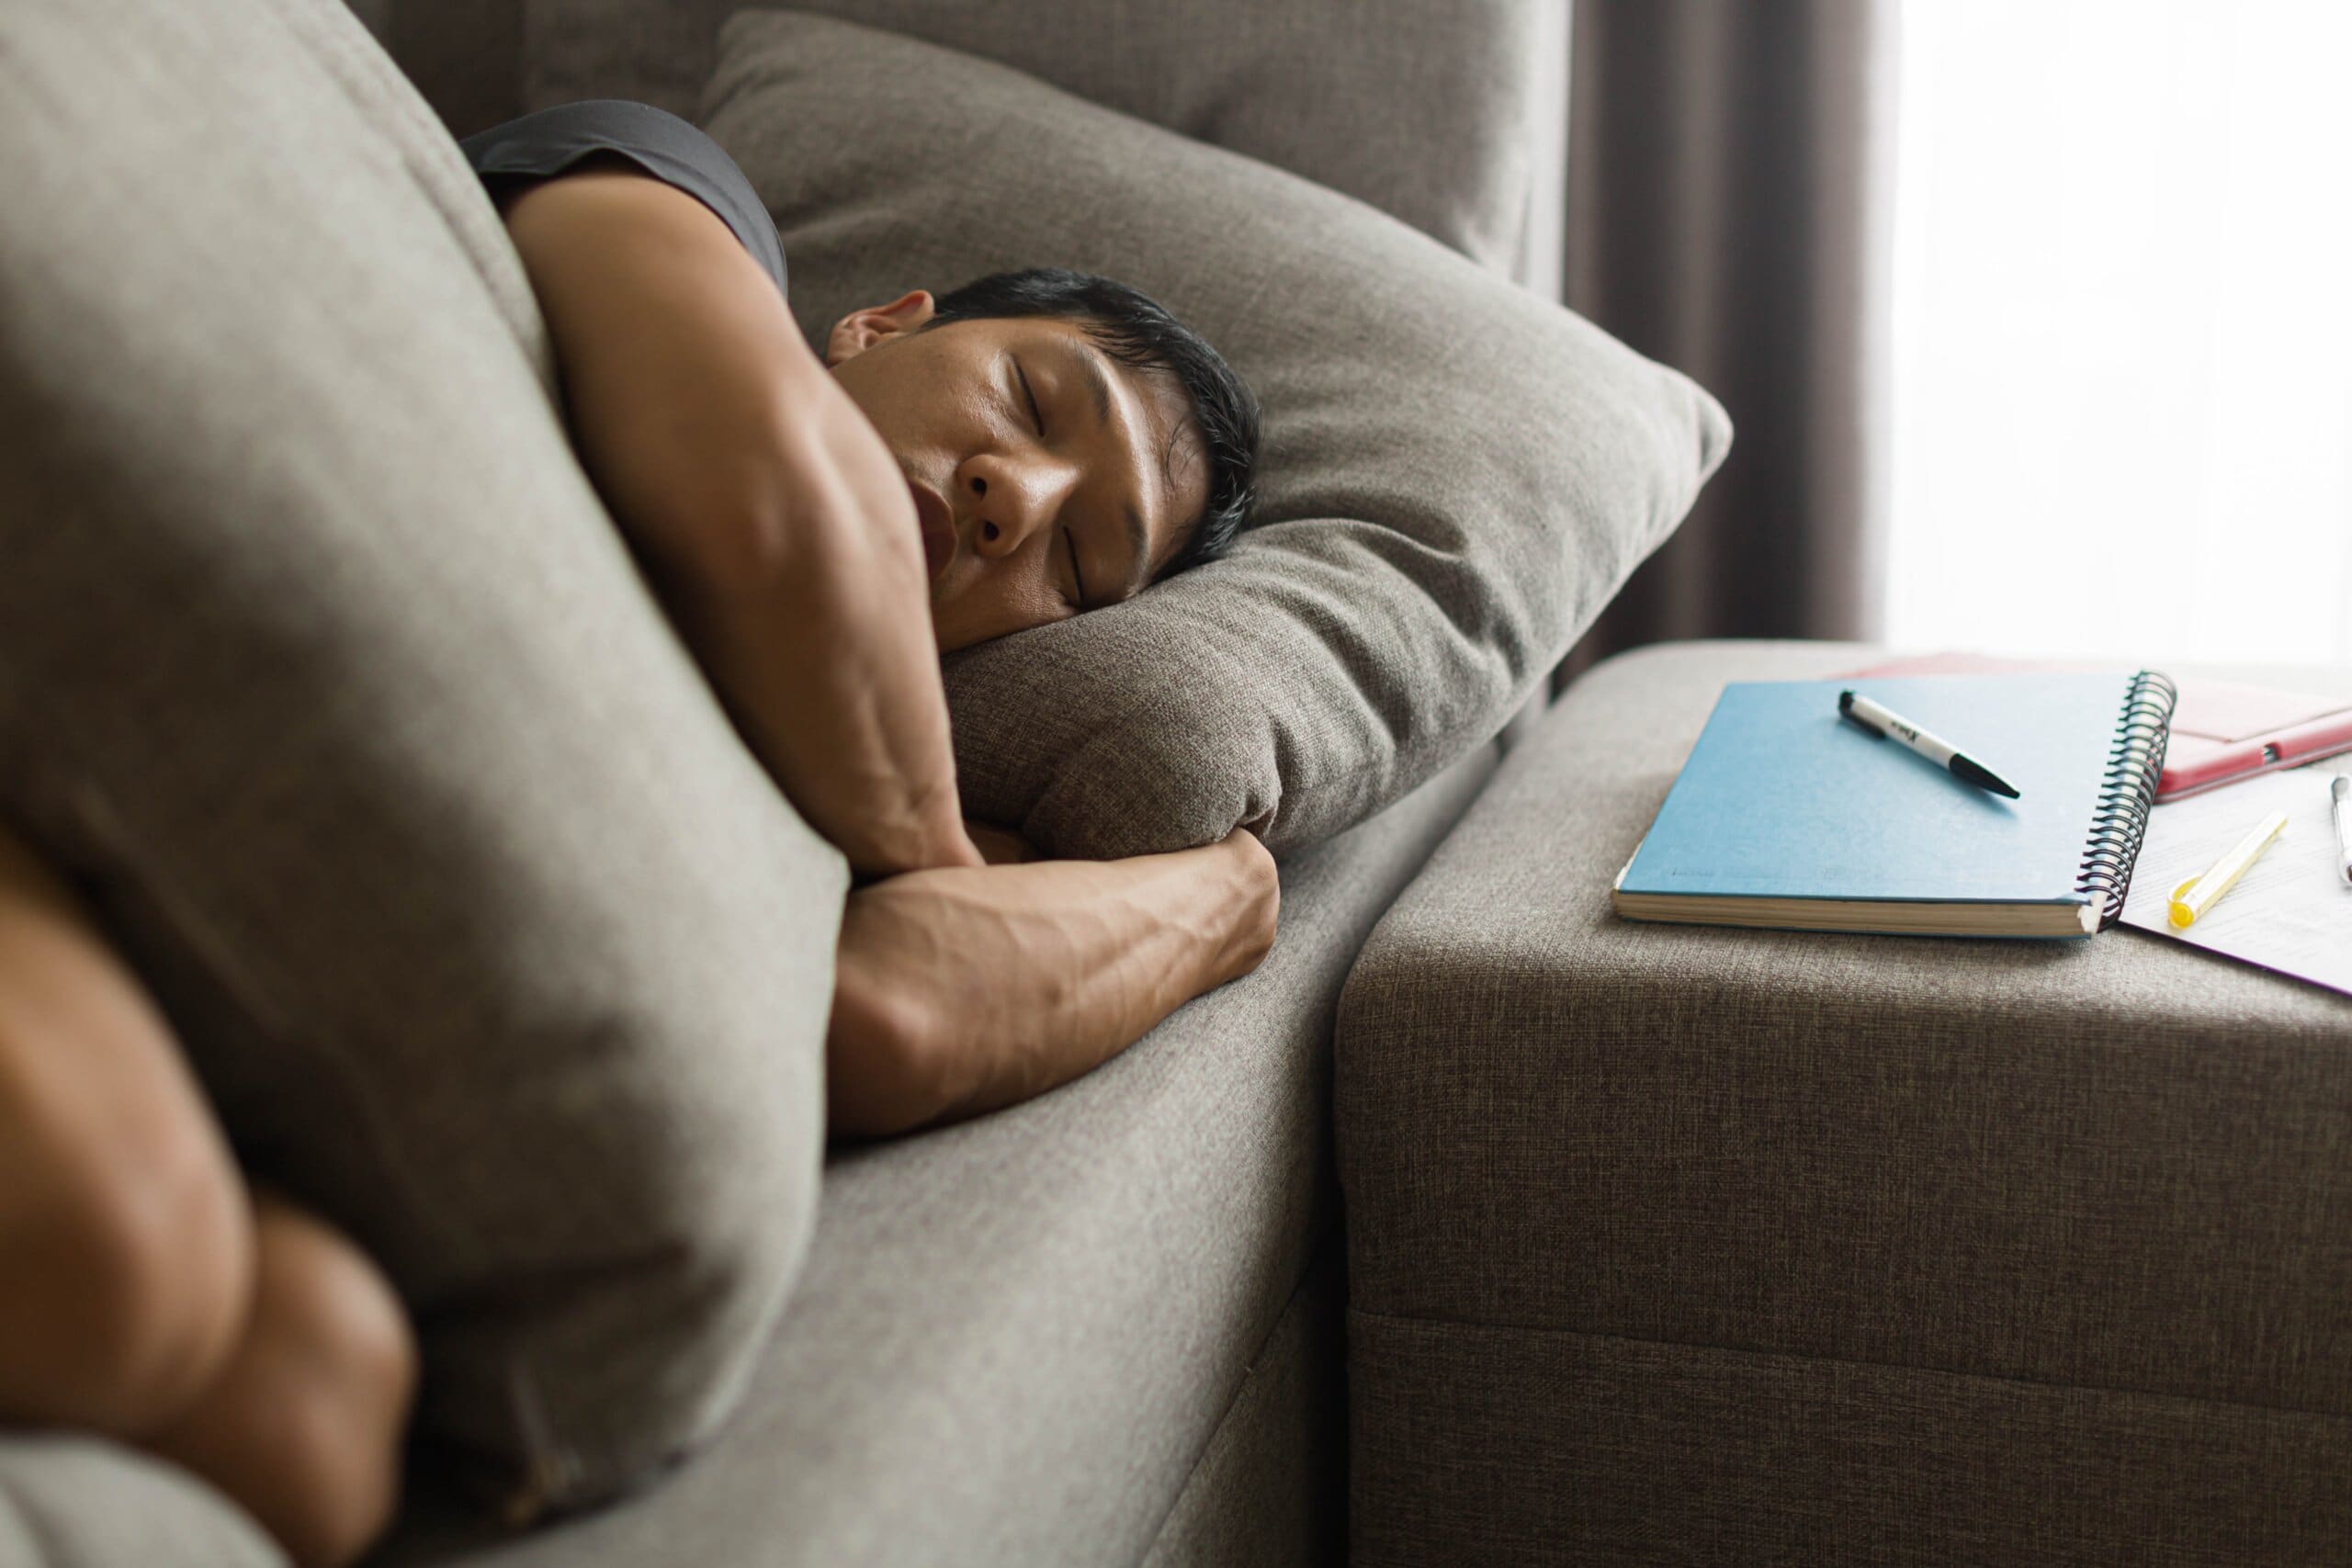 Man sleeping on sofa with notebooks next to him.